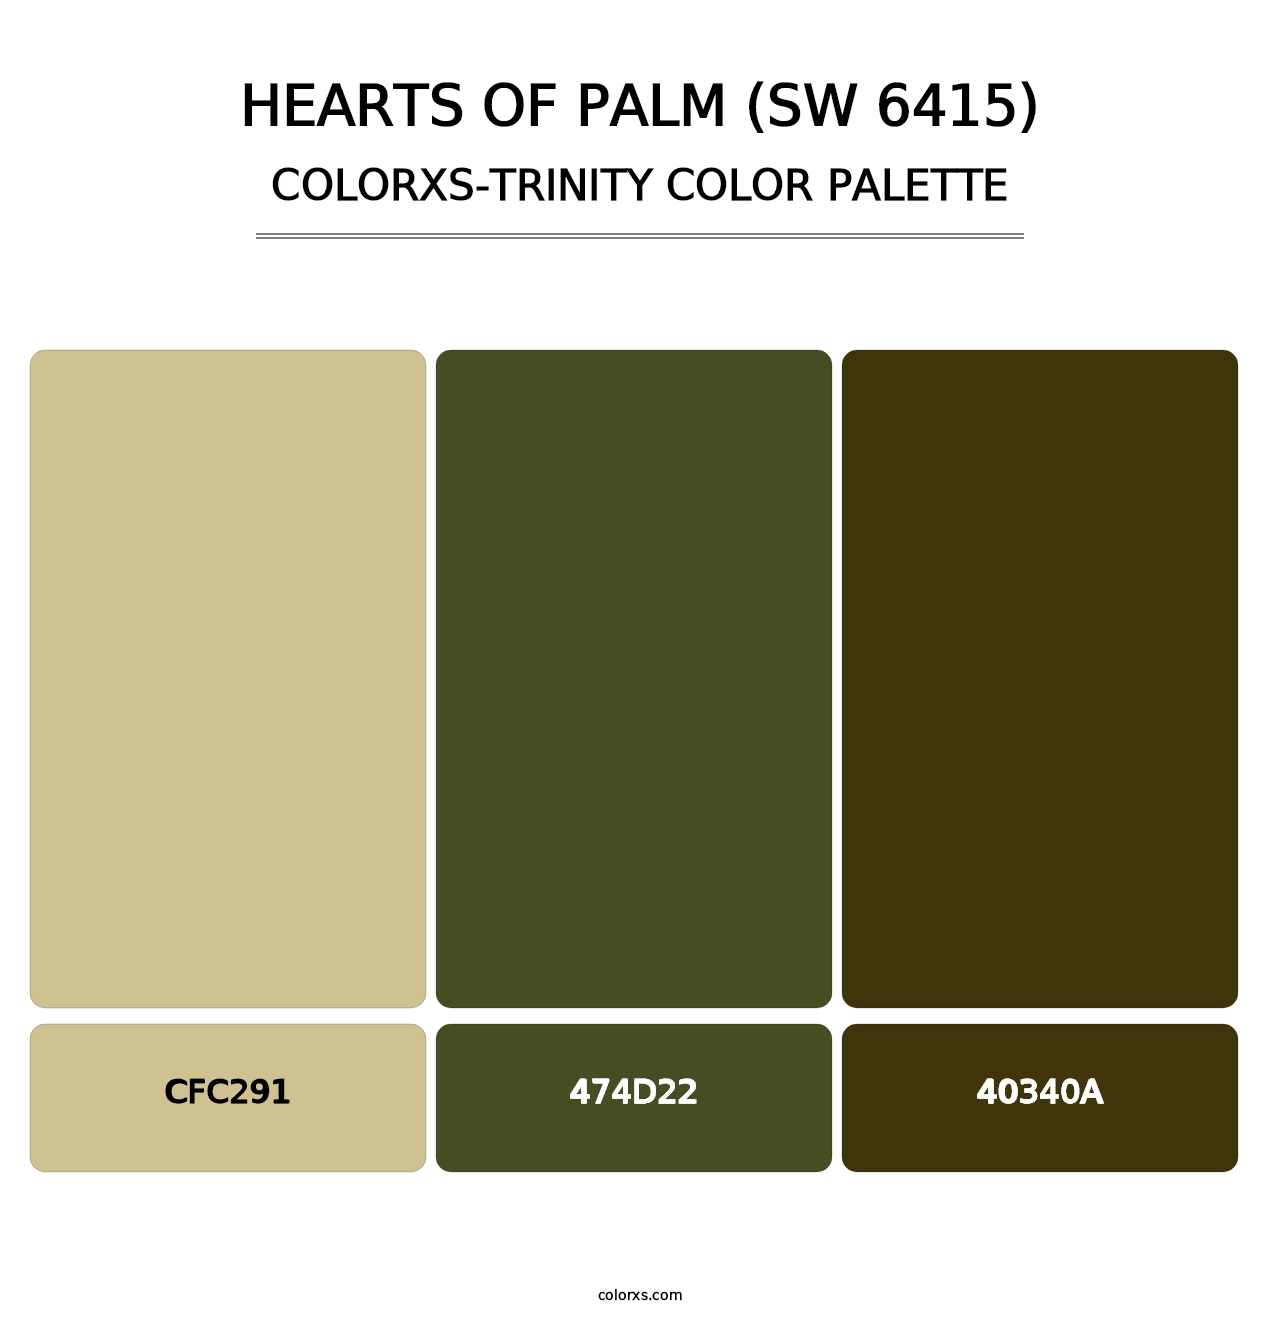 Hearts of Palm (SW 6415) - Colorxs Trinity Palette